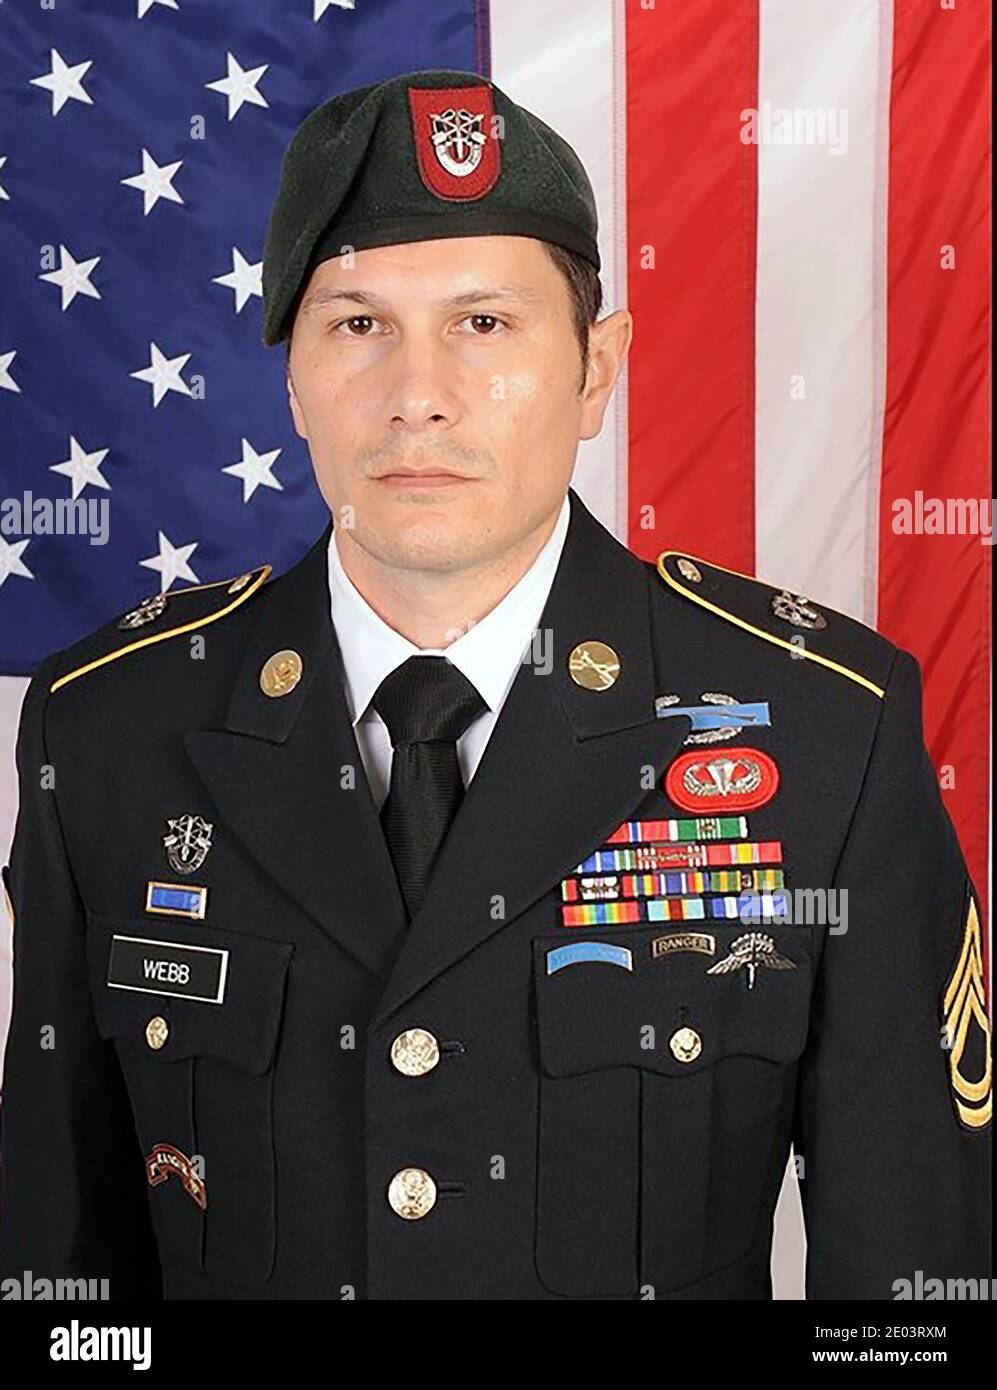 Rockford, United States. 29th Dec, 2020. The U.S. Army has released this December 2019 photo of 37-year-old Duke Webb, on Monday, December 28, 2020. Webb is facing murder charges and attempted murder charges after being arrested following the shooting at Don Carter Lanes in Rockford, Illinois on December 26, 2020. Webb shot and killed three men and shot and injured two teens. Photo by U.S. Army/UPI Credit: UPI/Alamy Live News Stock Photo